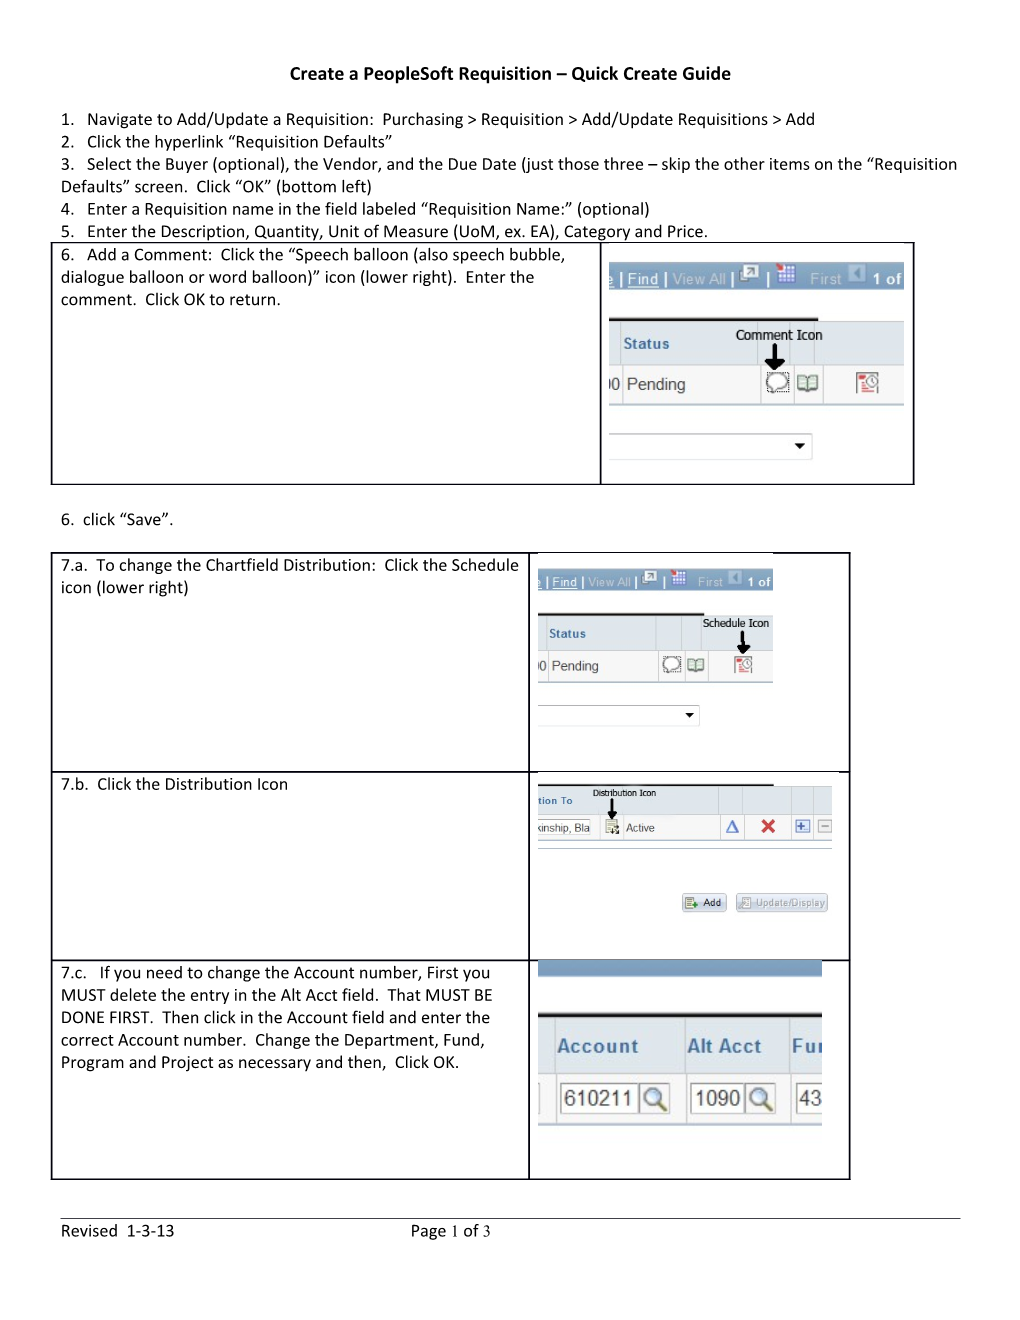 Create a Peoplesoft Requisition Quick Create Guide